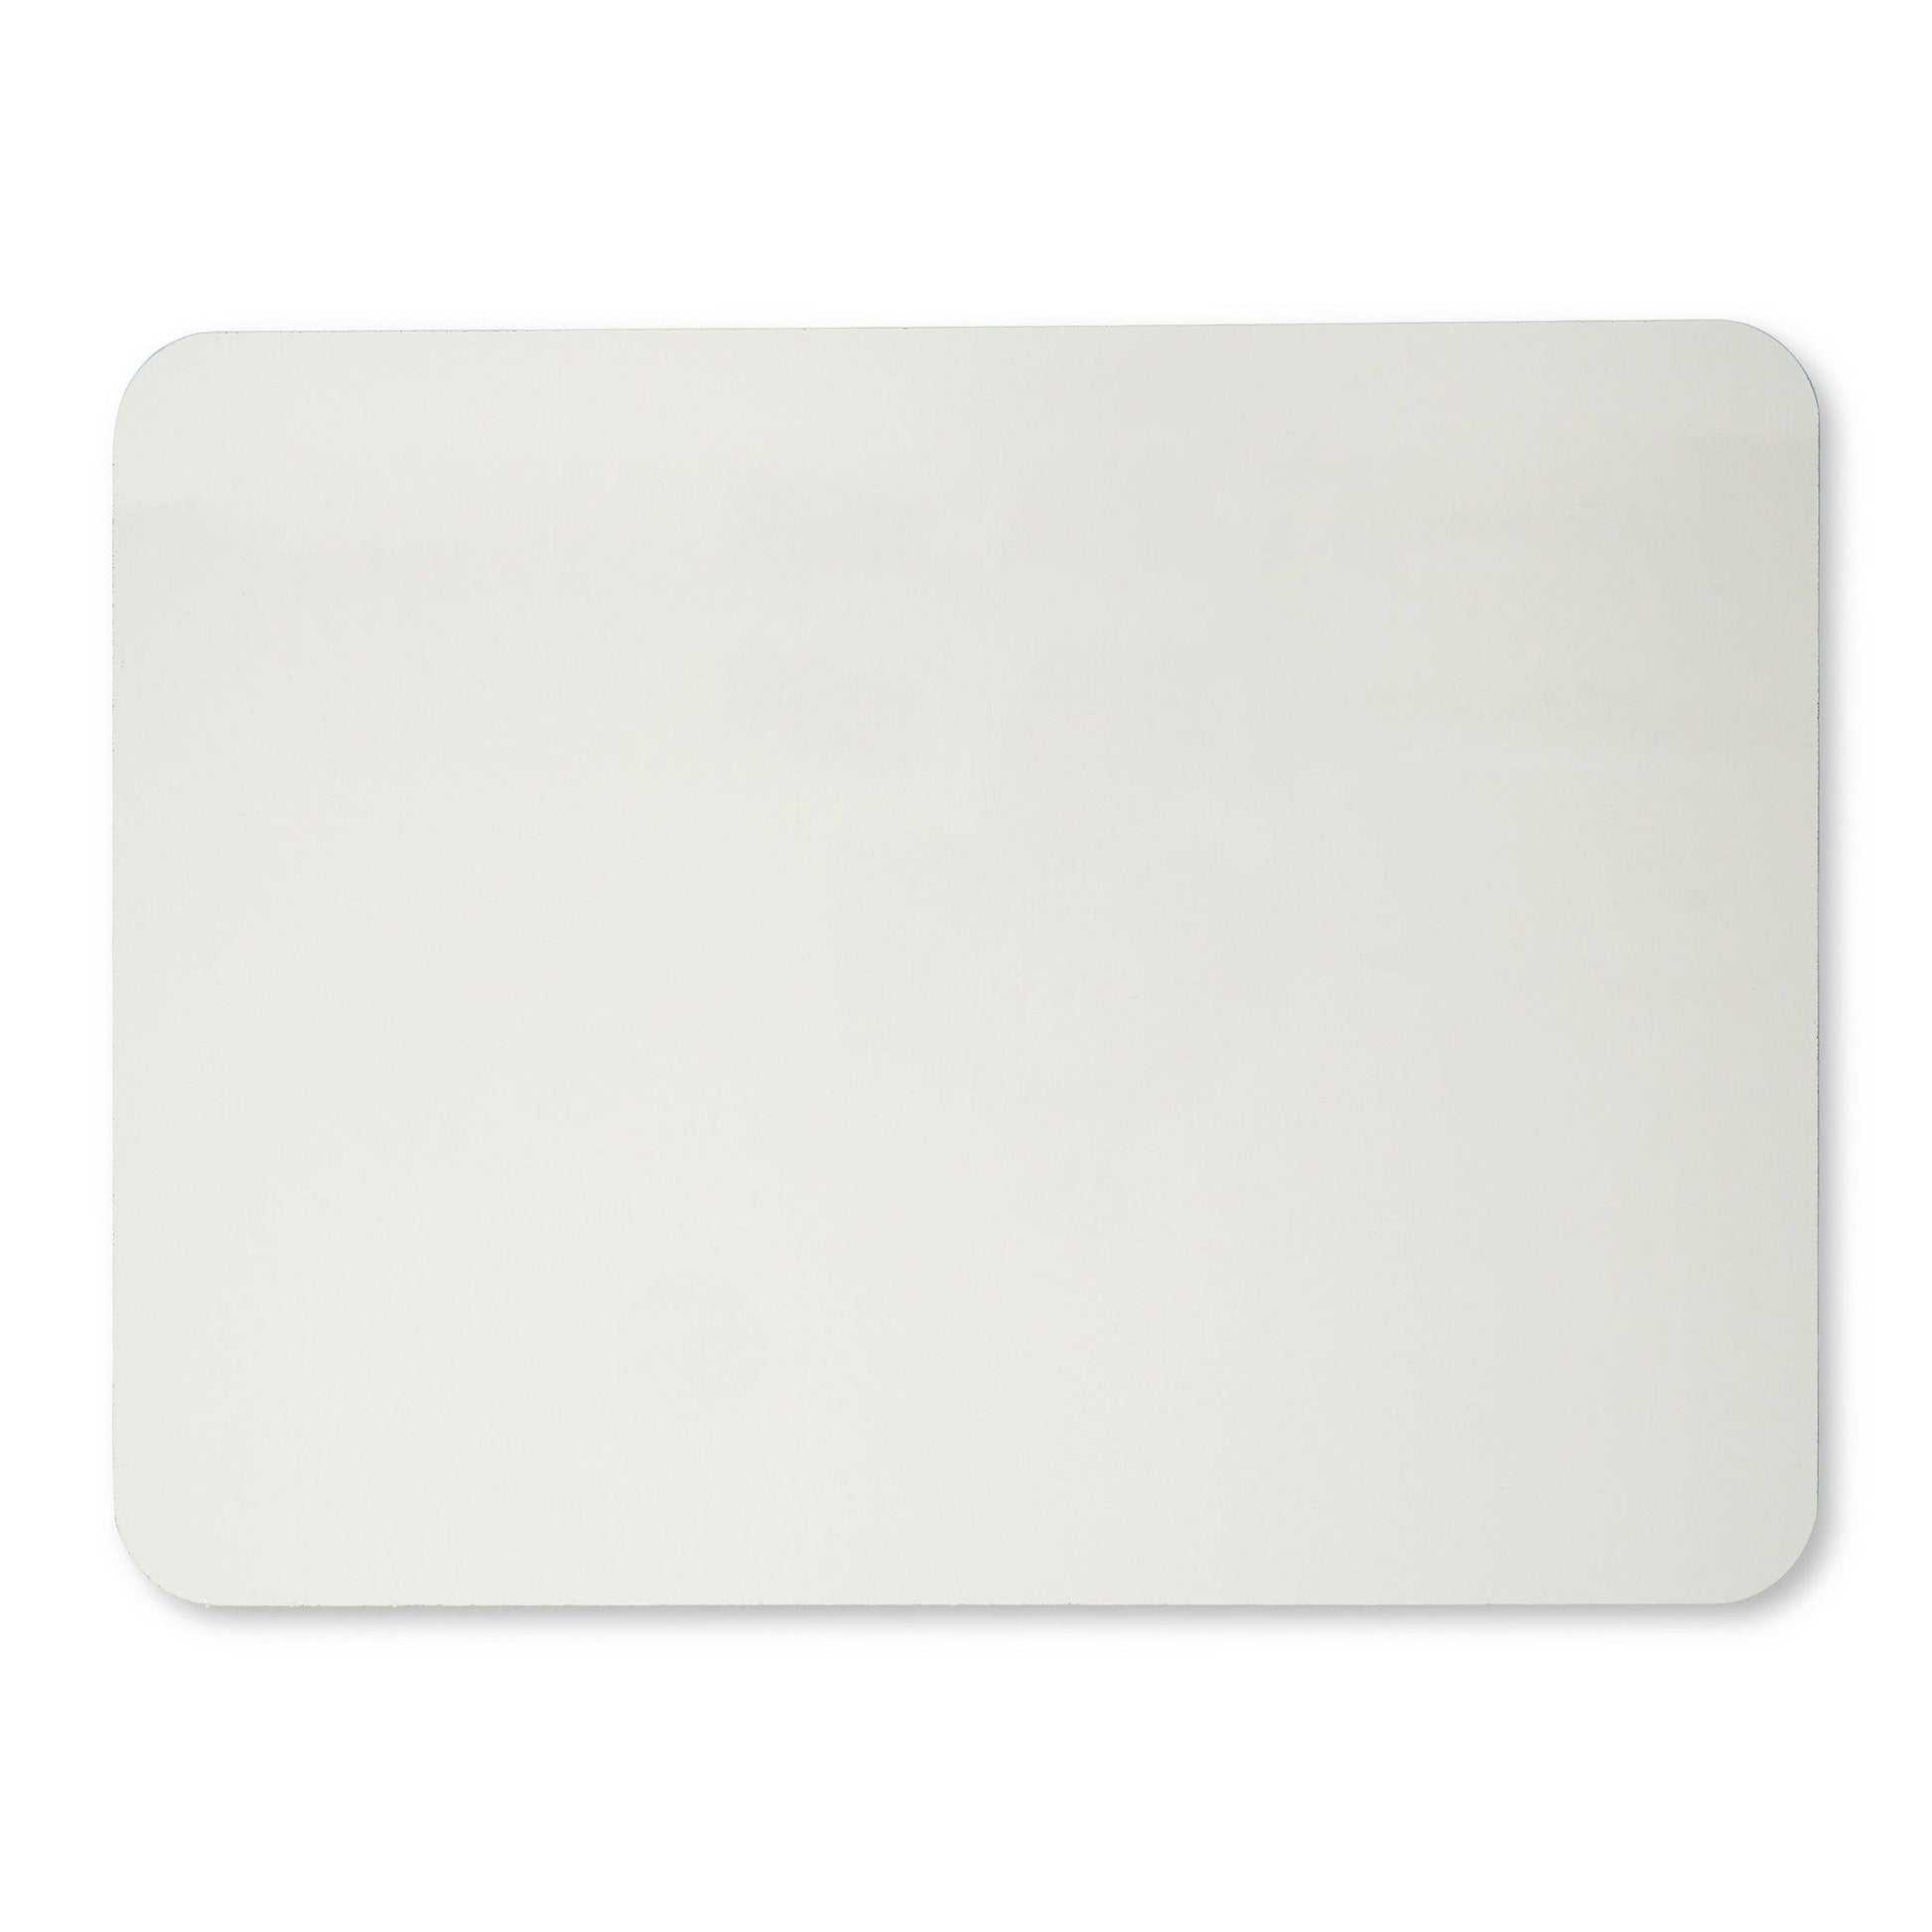 Magnetic Dry Erase Board, Two Sided, Plain/Plain, 9" x 12", Pack of 3 - Loomini